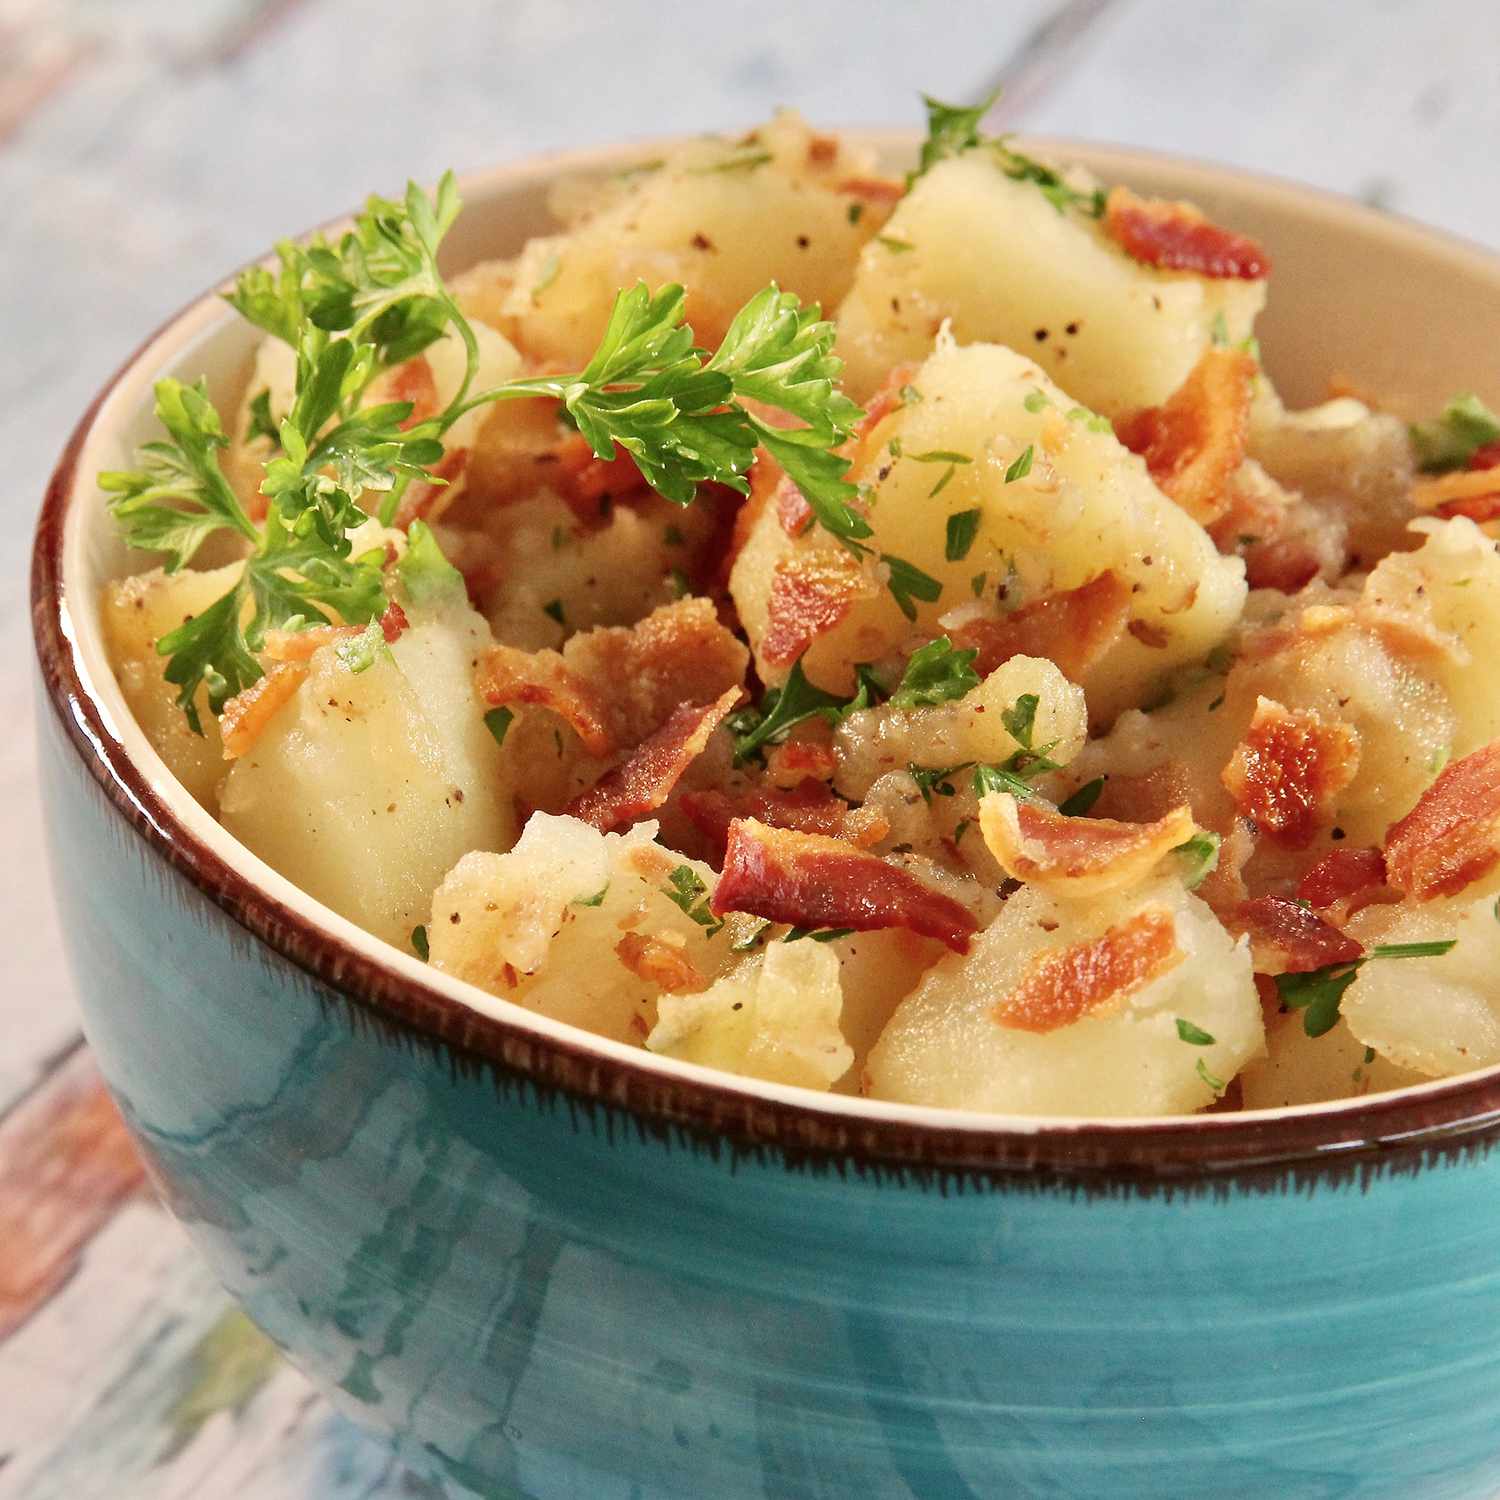 Cold German Potato Salad Recipe Mayonnaise: Step by Step Guide